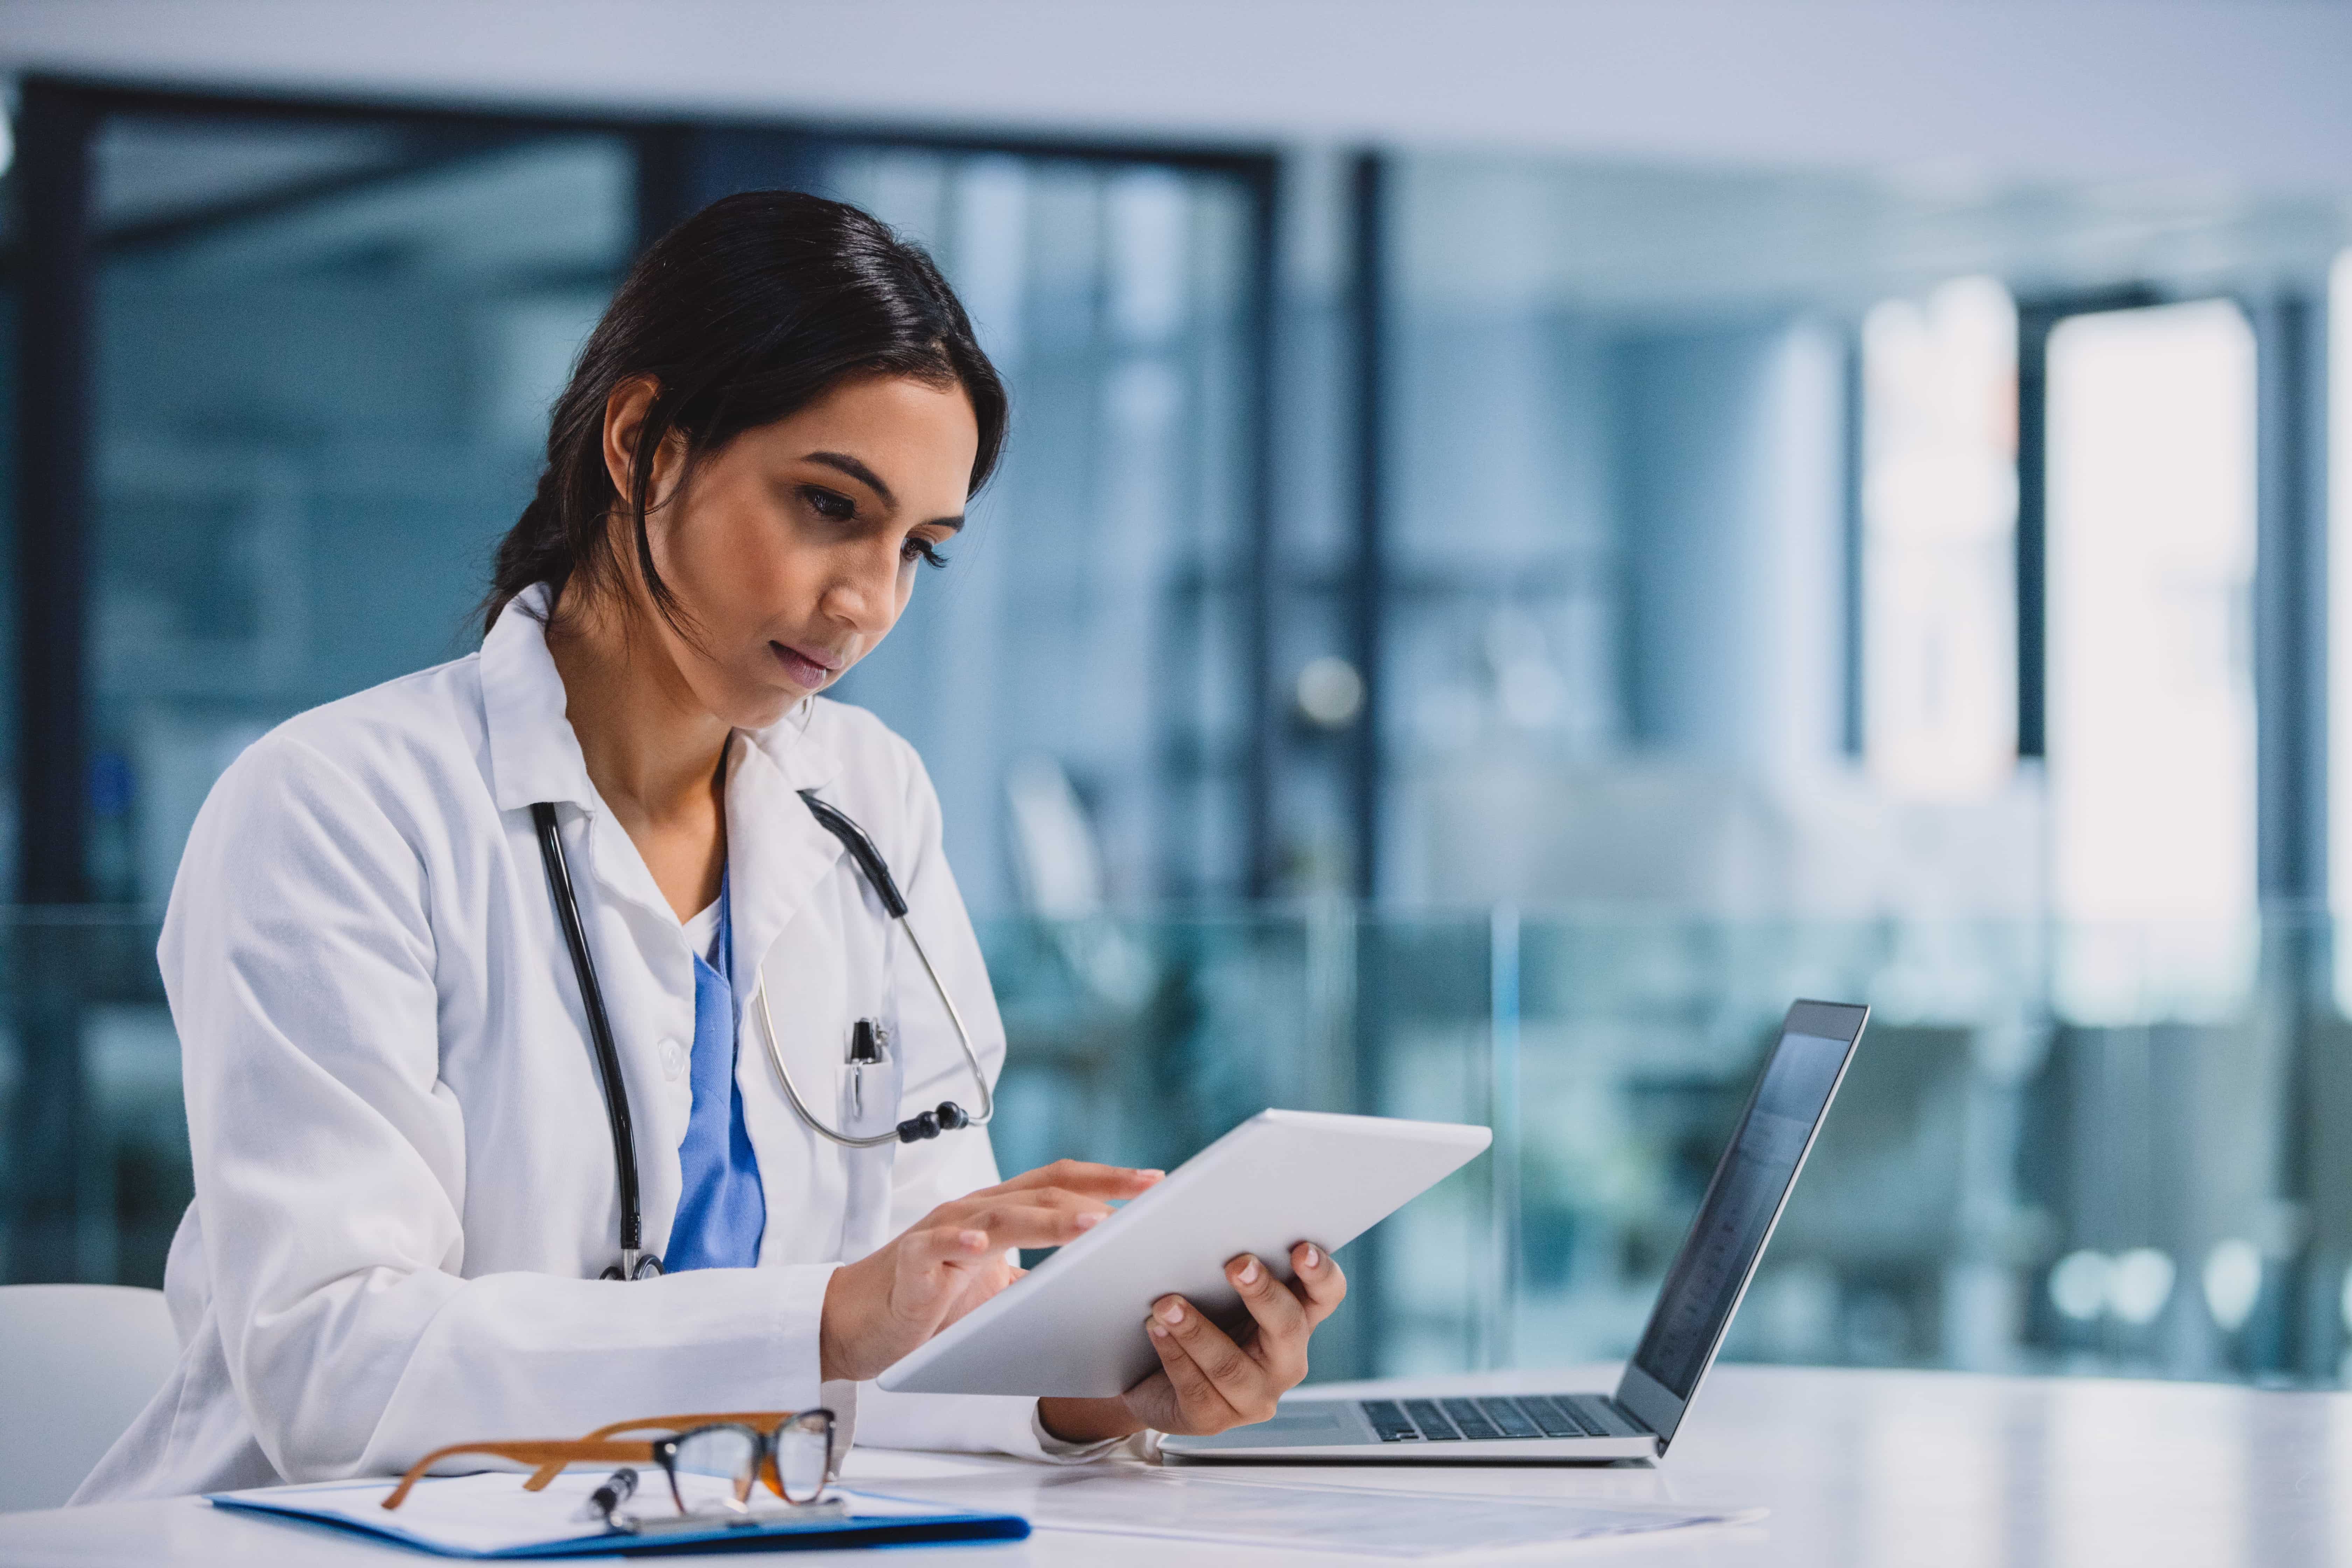 3 Digital Solutions That Can Help Improve Clinical Efficiency